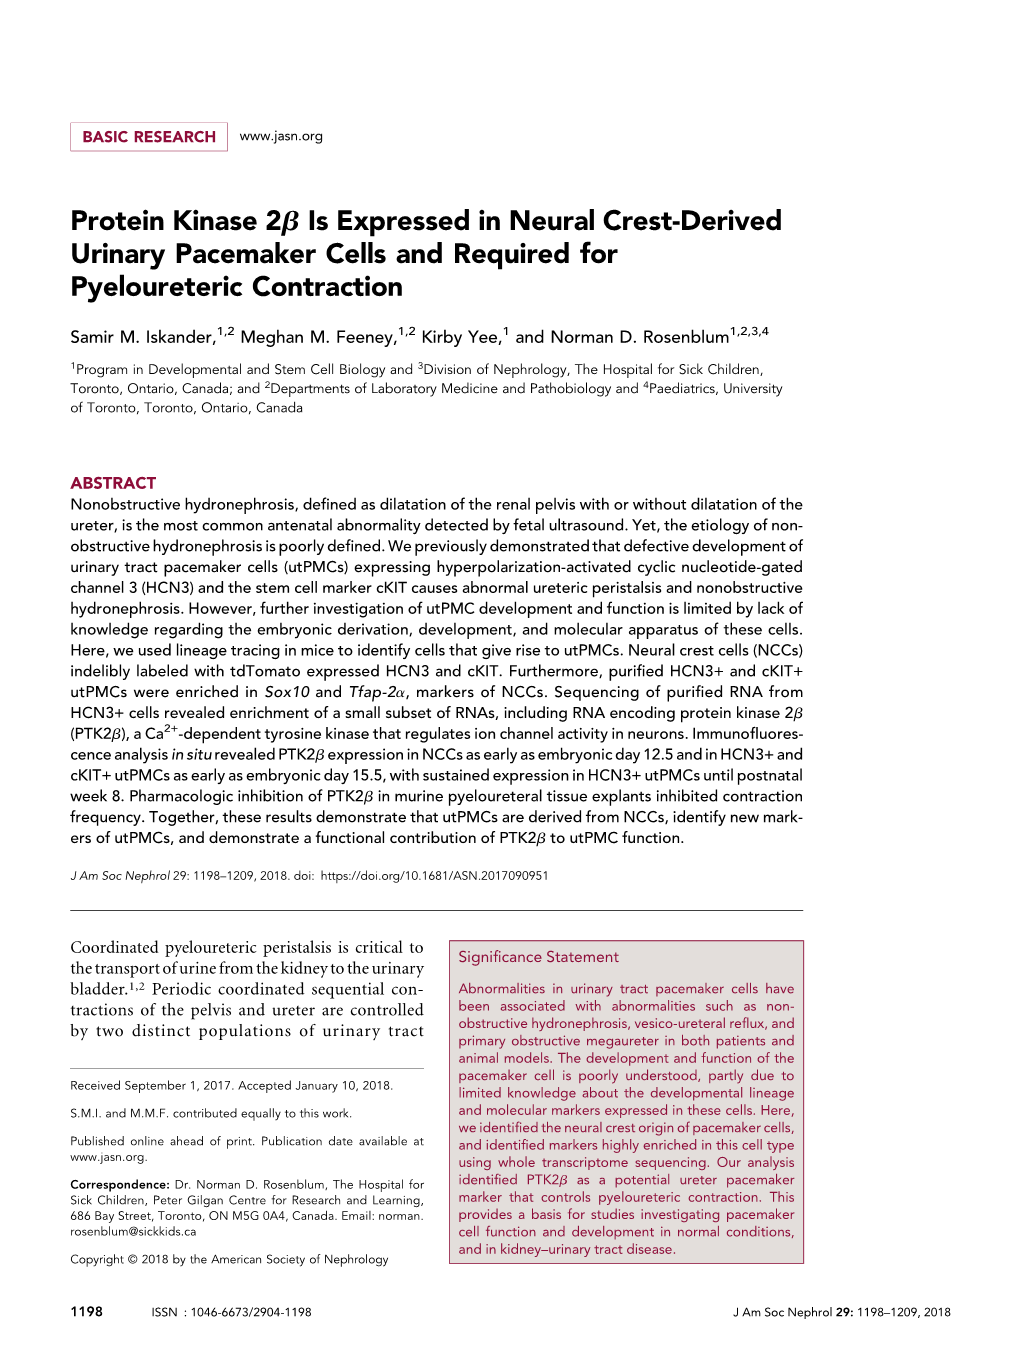 Protein Kinase 2Β Is Expressed in Neural Crest-Derived Urinary Pacemaker Cells and Required for Pyeloureteric Contraction